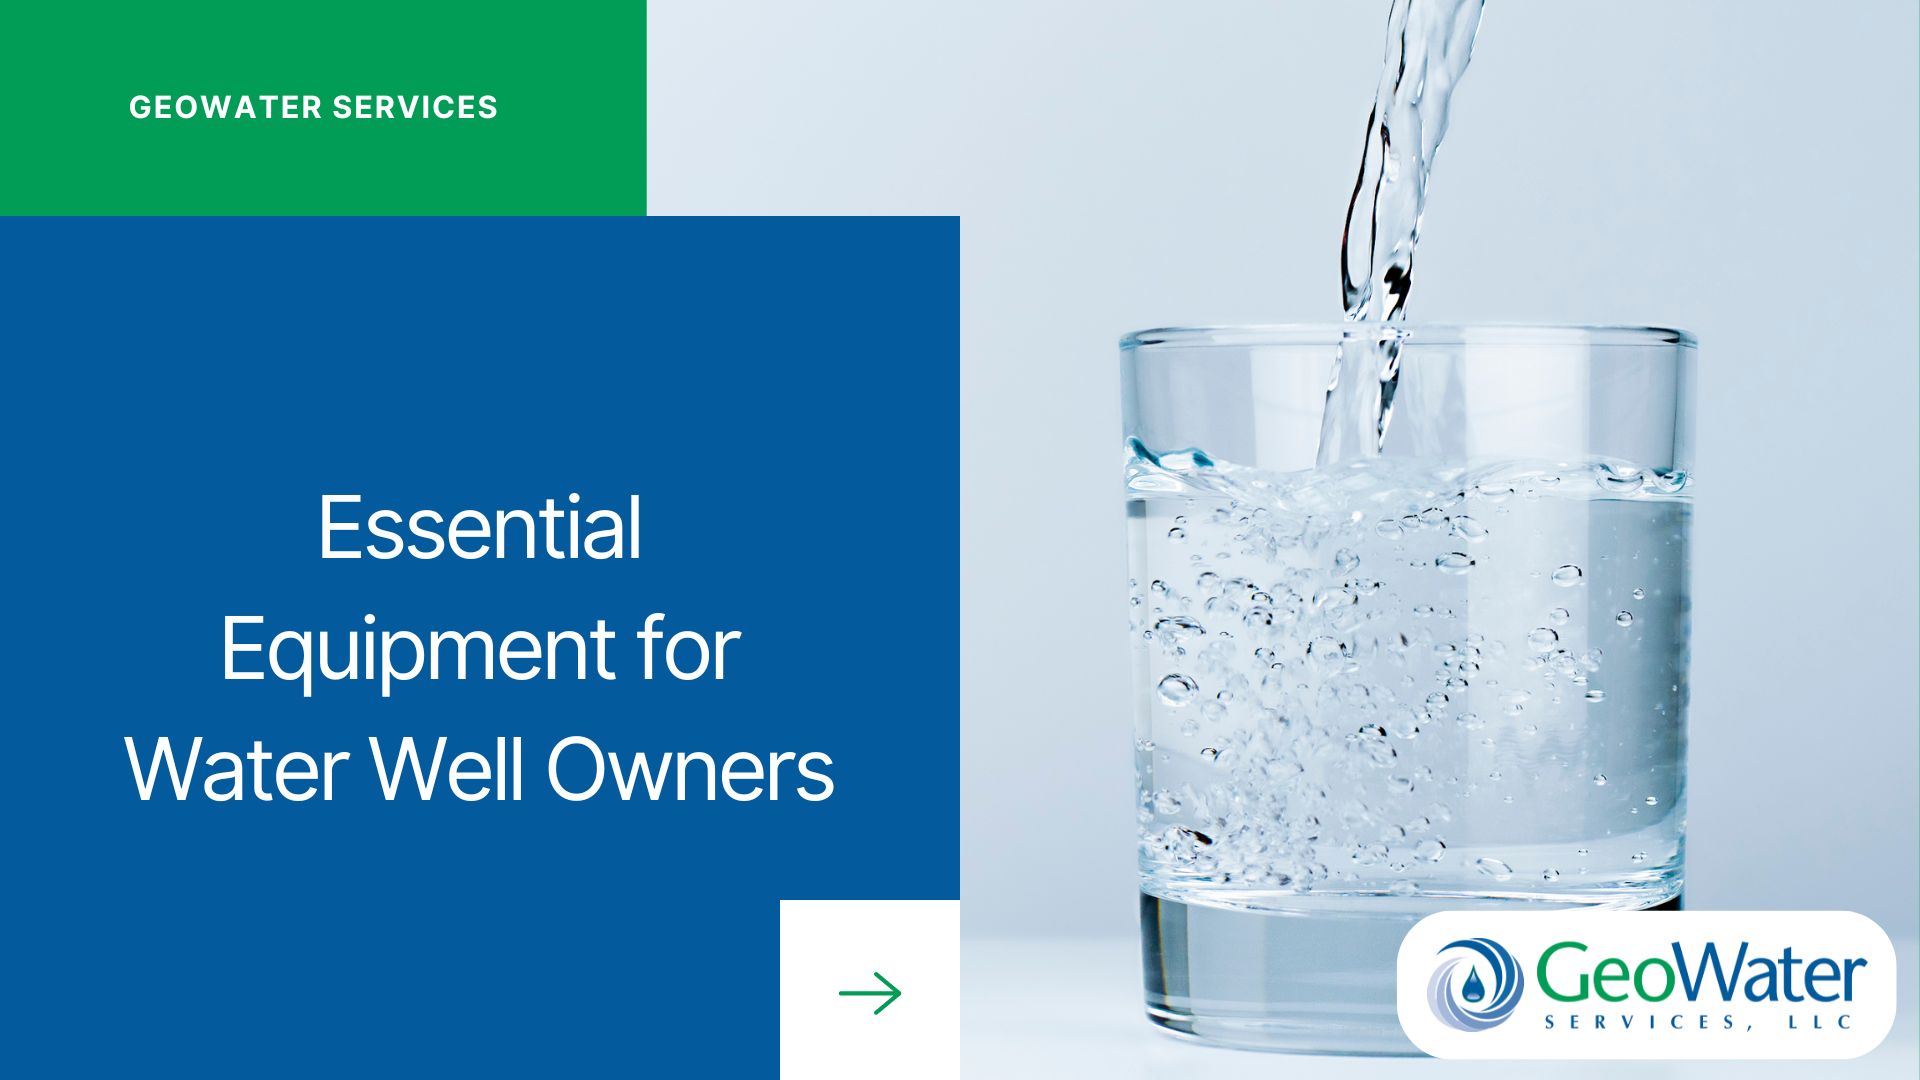 Essential Equipment for Water Well Owners